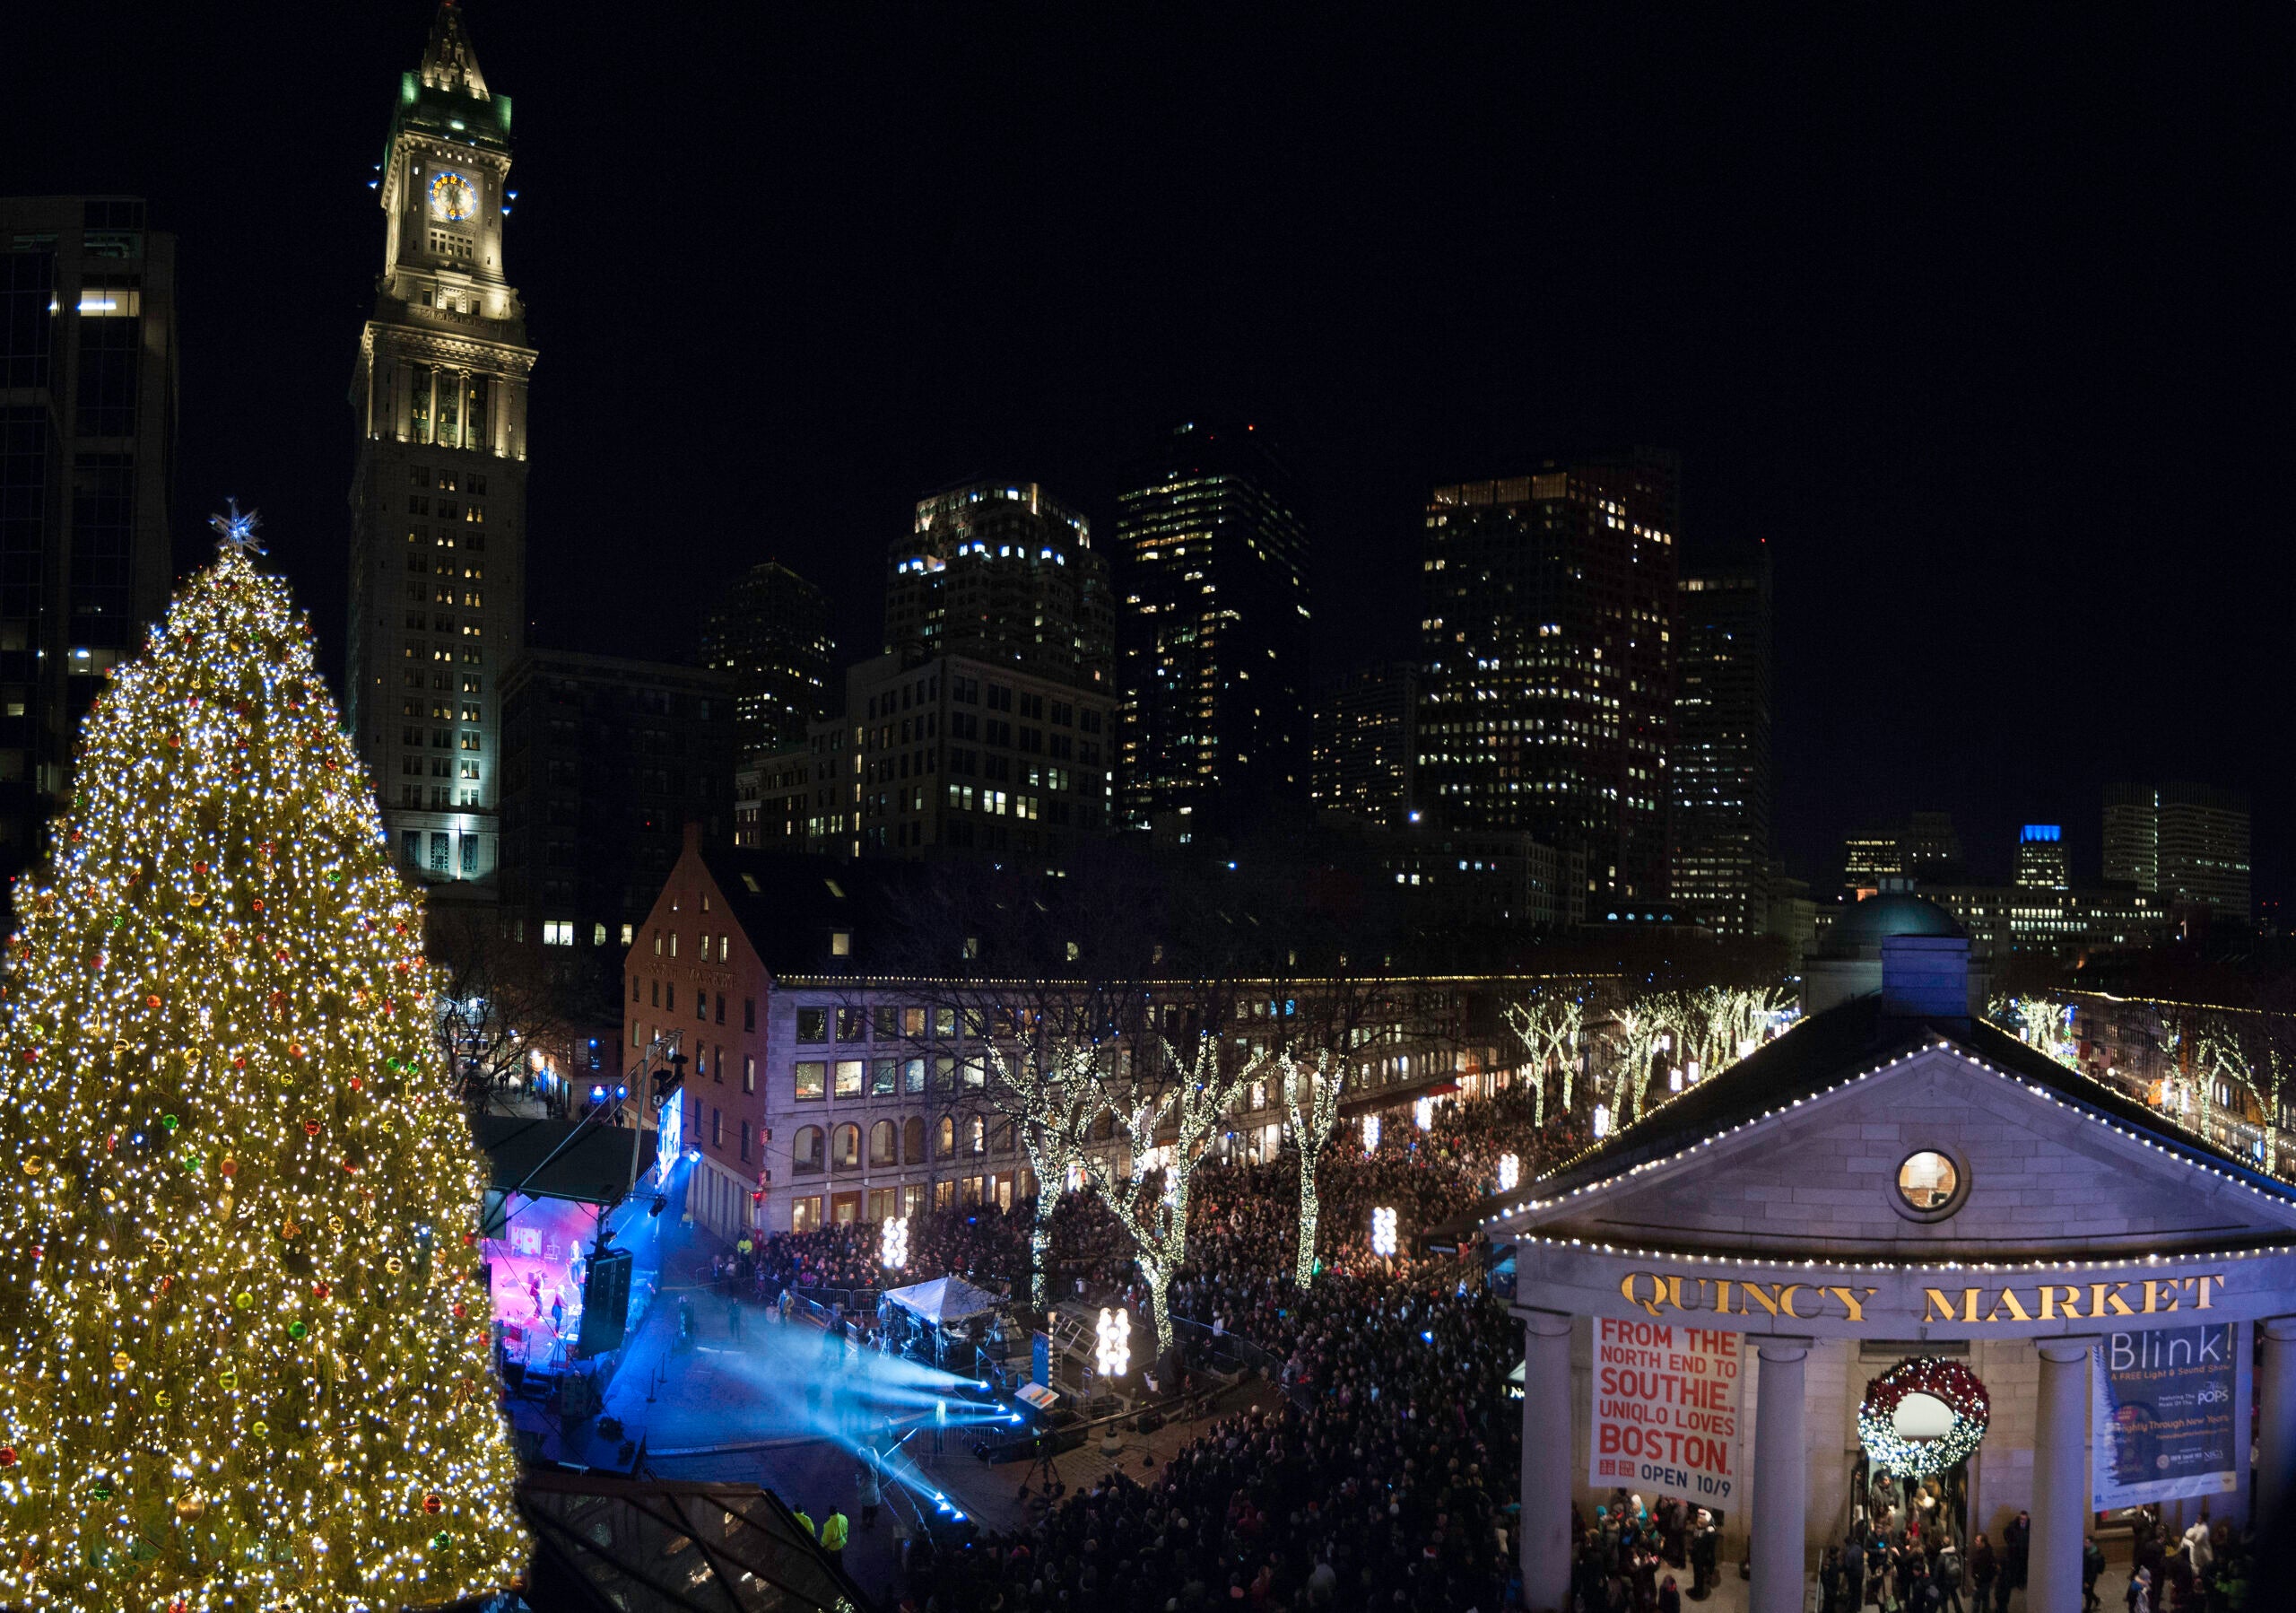 Believe it or not, here comes the Faneuil Hall Tree Lighting Spectacular